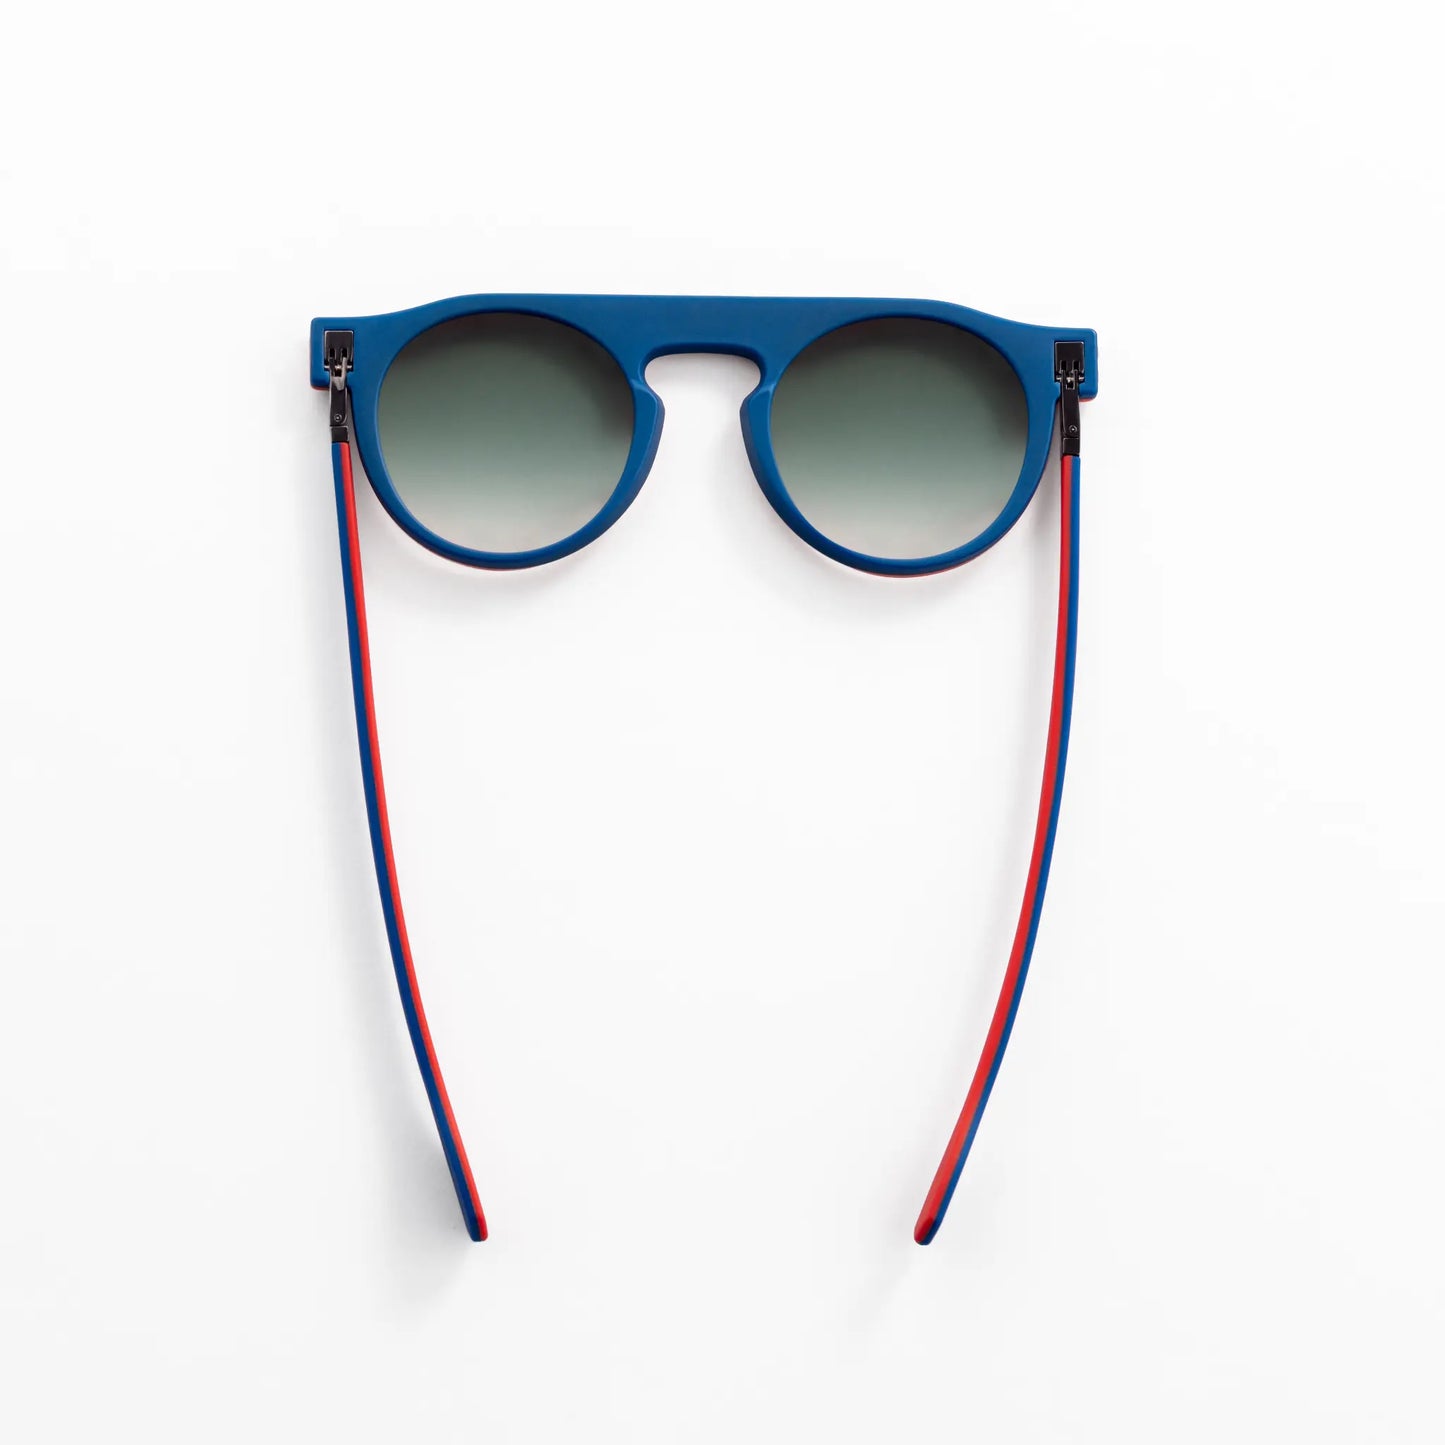 Reverso sunglasses blue & red reversible & ultra light top view